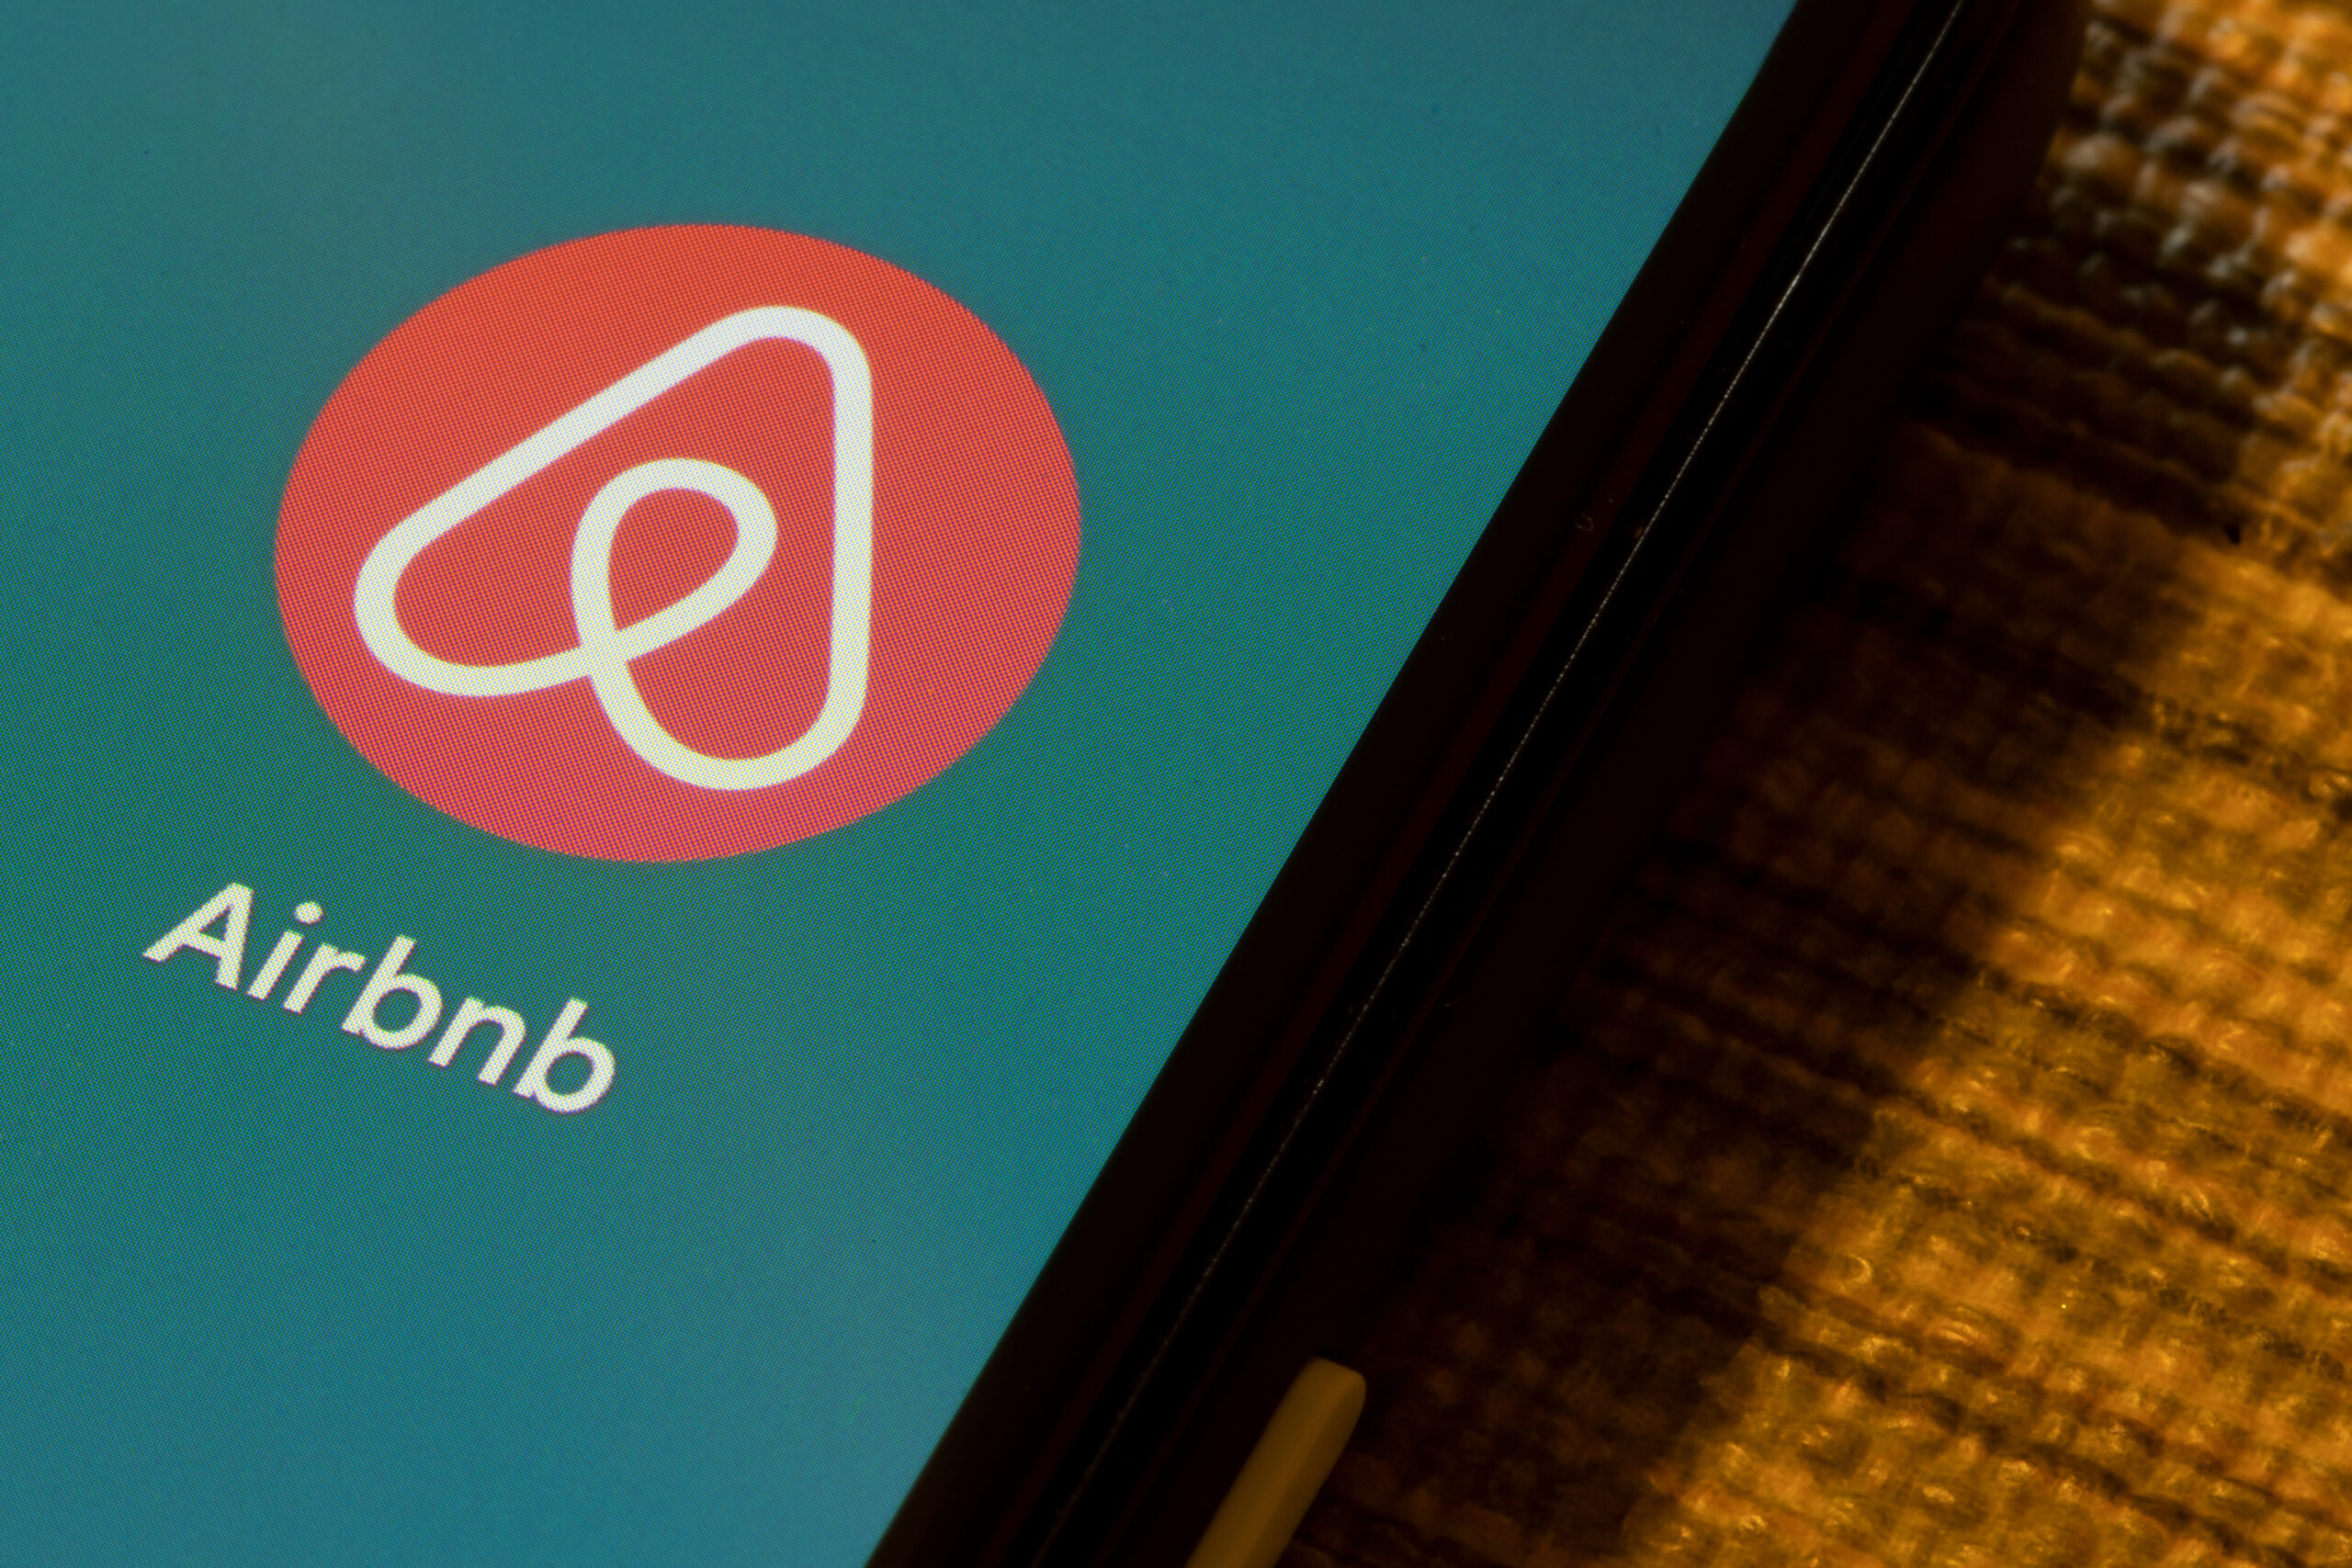 Airbnb case study of Engaging brand stories